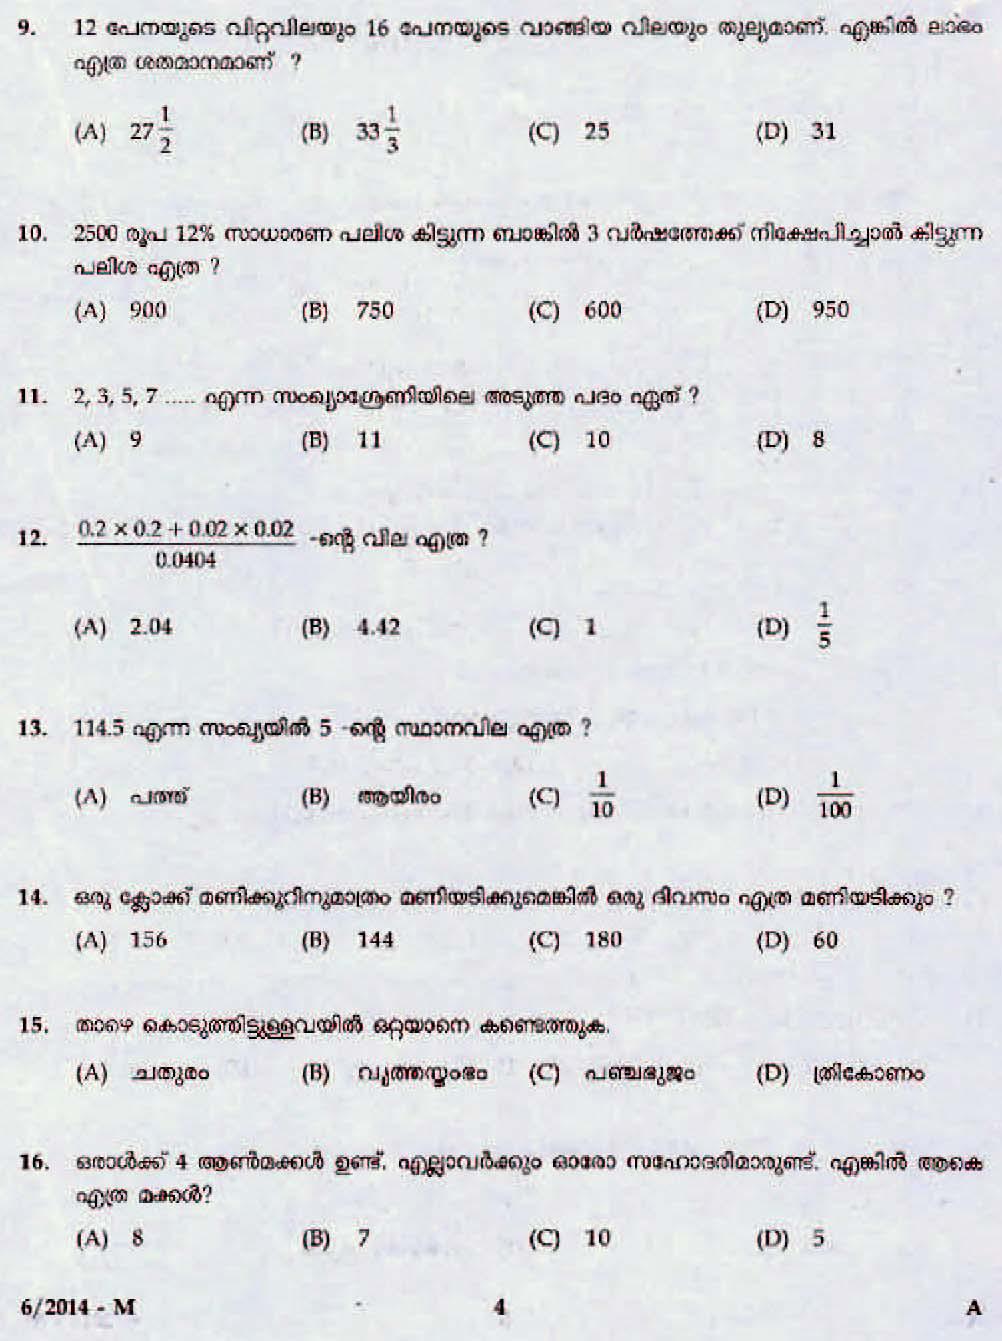 LD Clerk Question Paper Malayalam 2014 Paper Code 062014 M 2